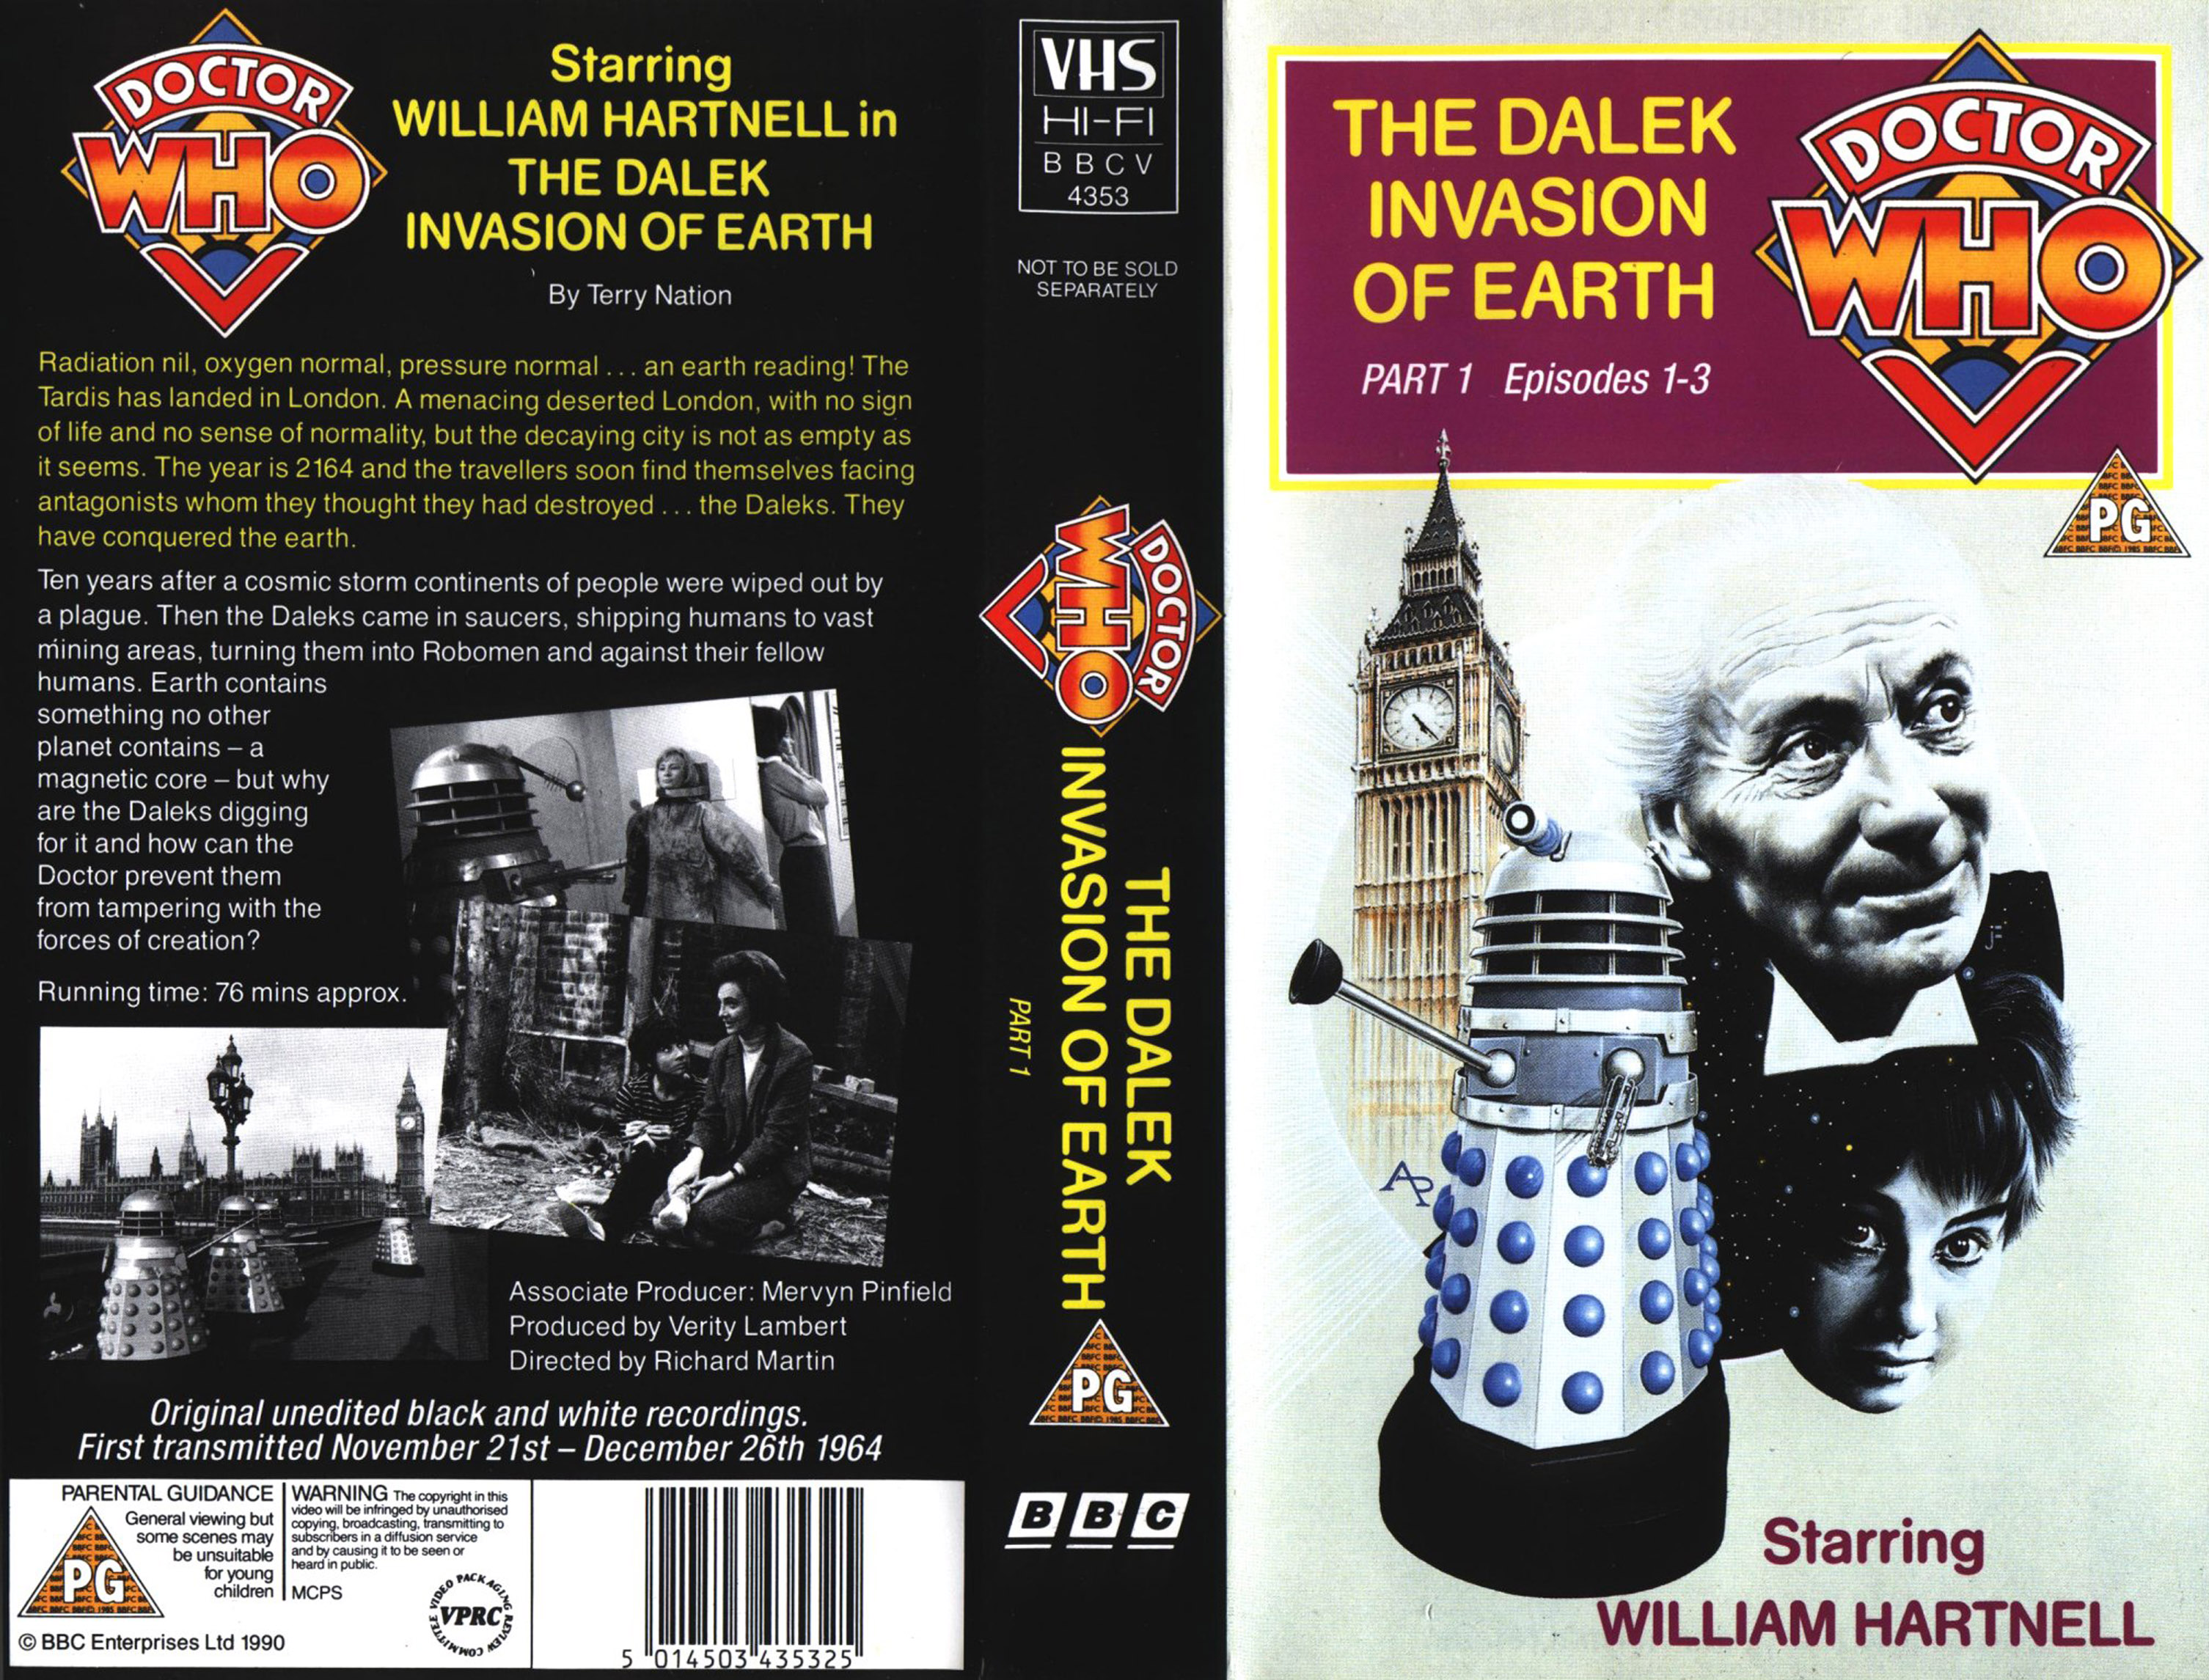 The Dalek Invasion of Earth VHS